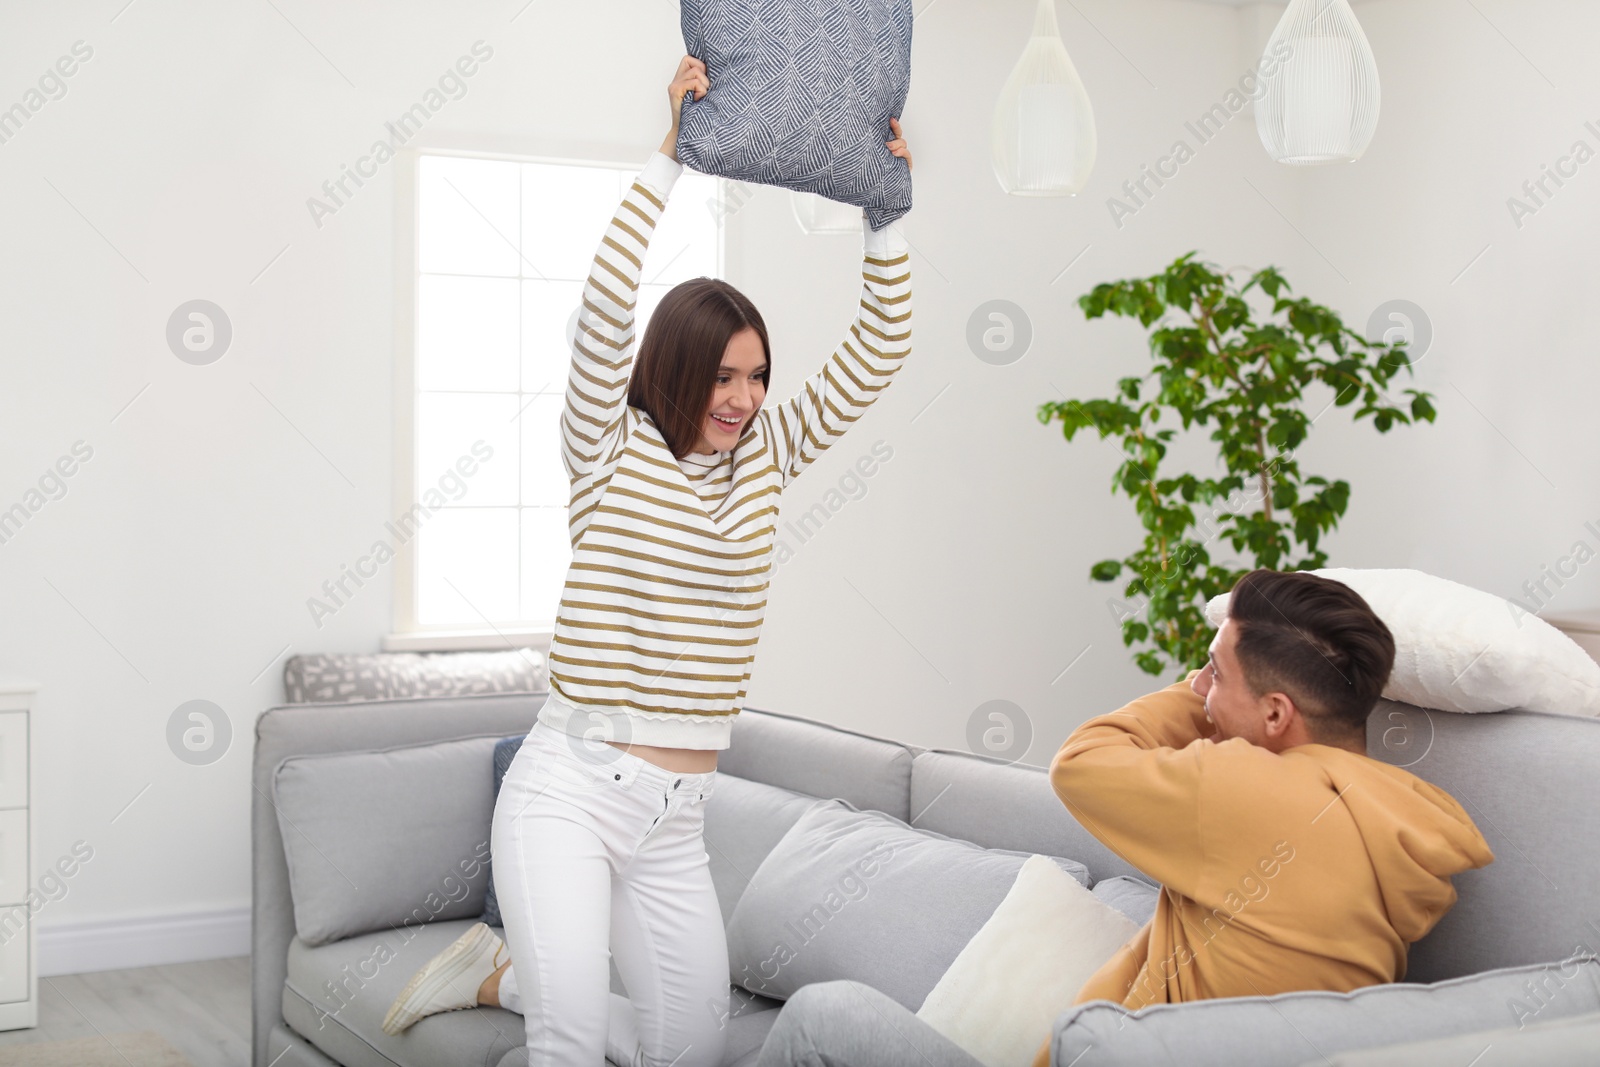 Photo of Happy couple having pillow fight in living room